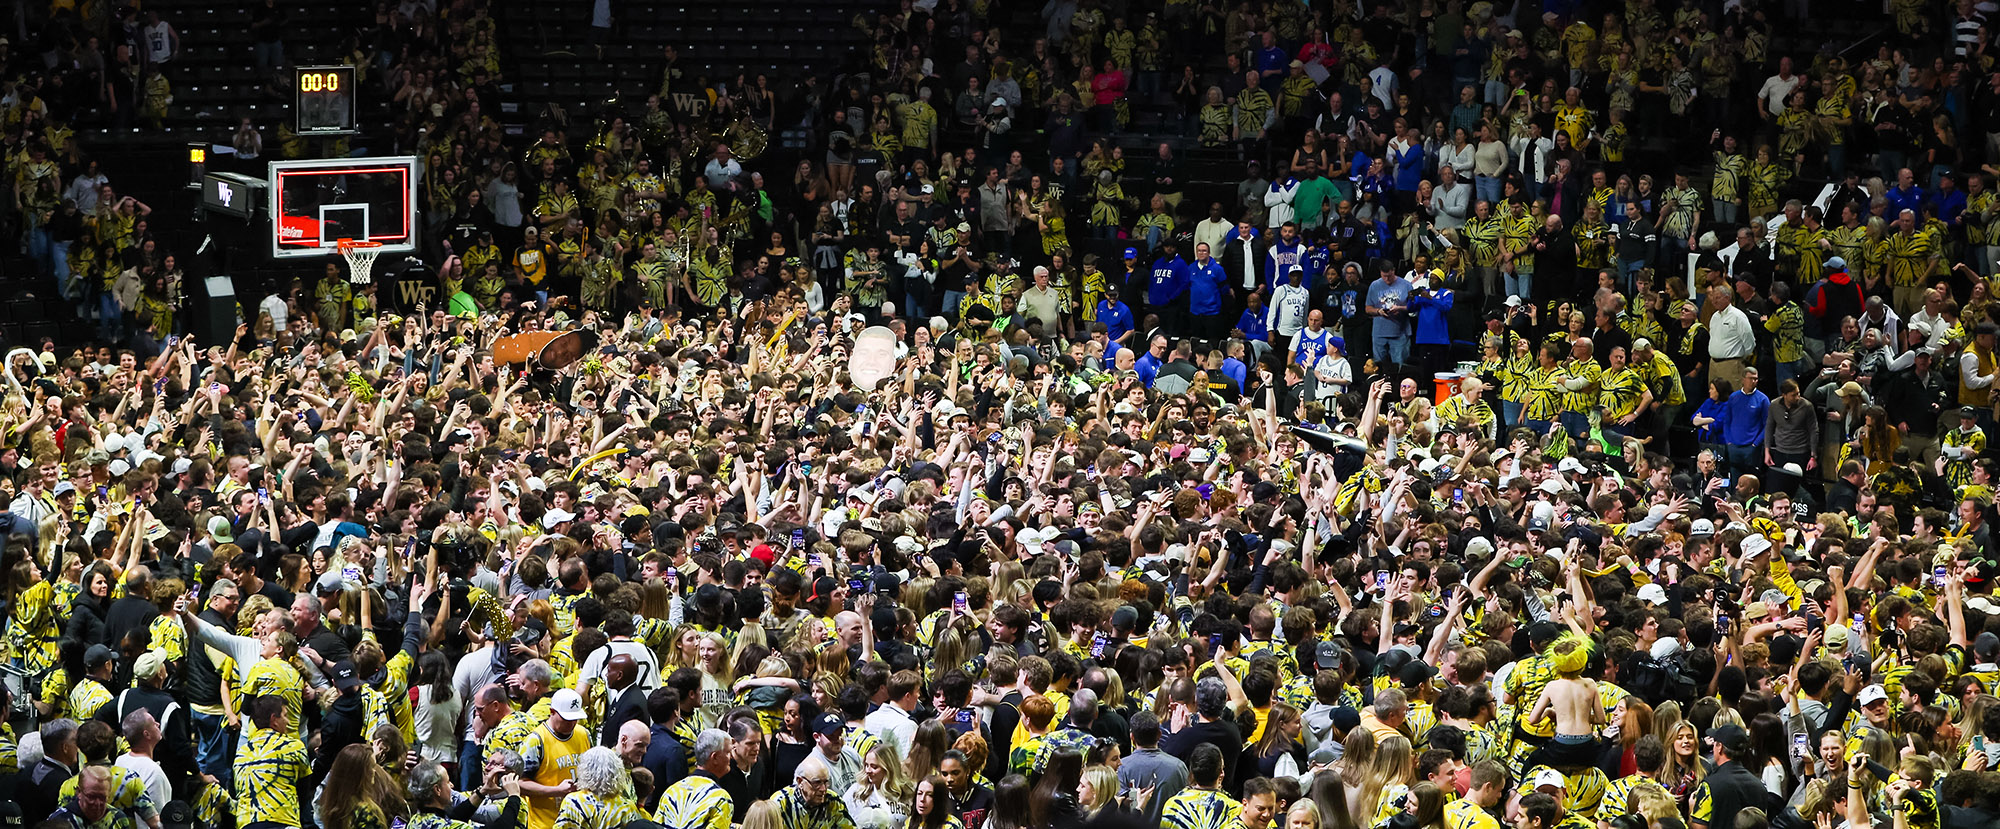 Wake Forest fans storm the court after a basketball game against Duke at Lawrence Joel Veterans Memorial Coliseum in Charlotte, North Carolina, recently. More and more incidents have raised questions about regulations. (Photo by David Jensen/Icon Sportswire via Getty Images)
